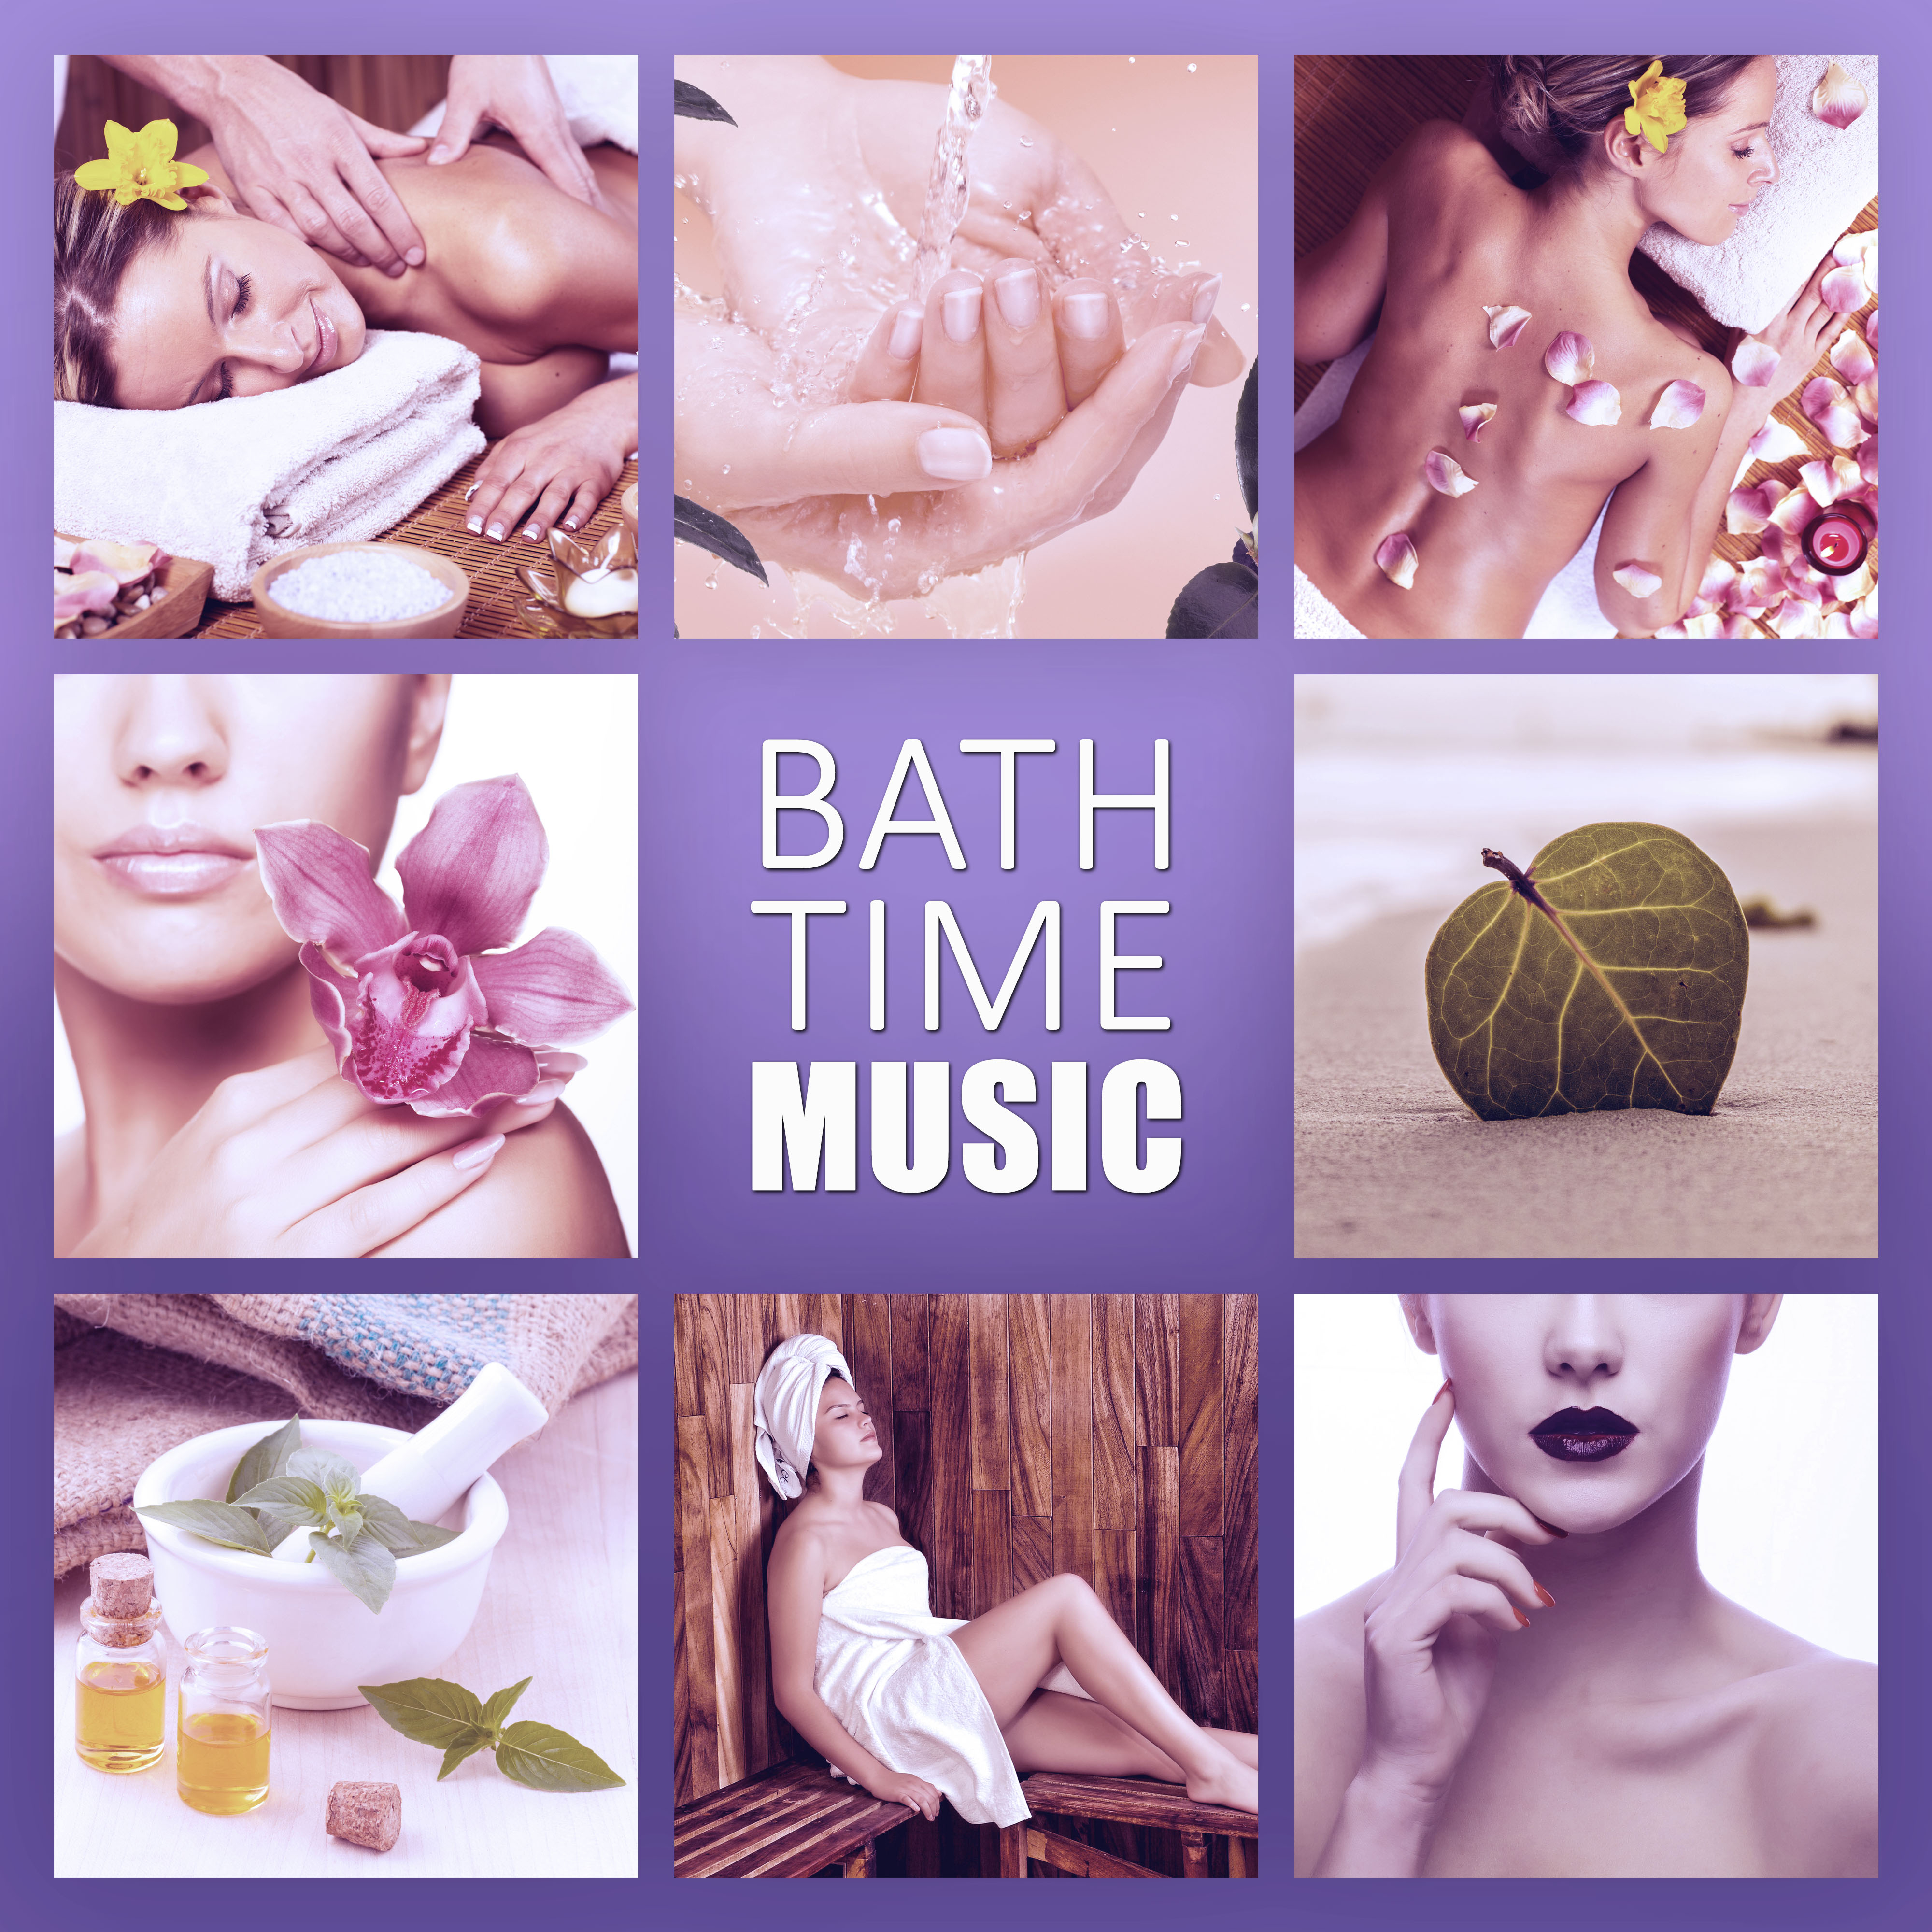 Bath Time Music – Healing Music for Deep Relaxing  to Helps You Feel Wonderfull at Your Home, Spa Day at Home, Inner Therapy, Calming Music, Deep Rest, Nature Sounds